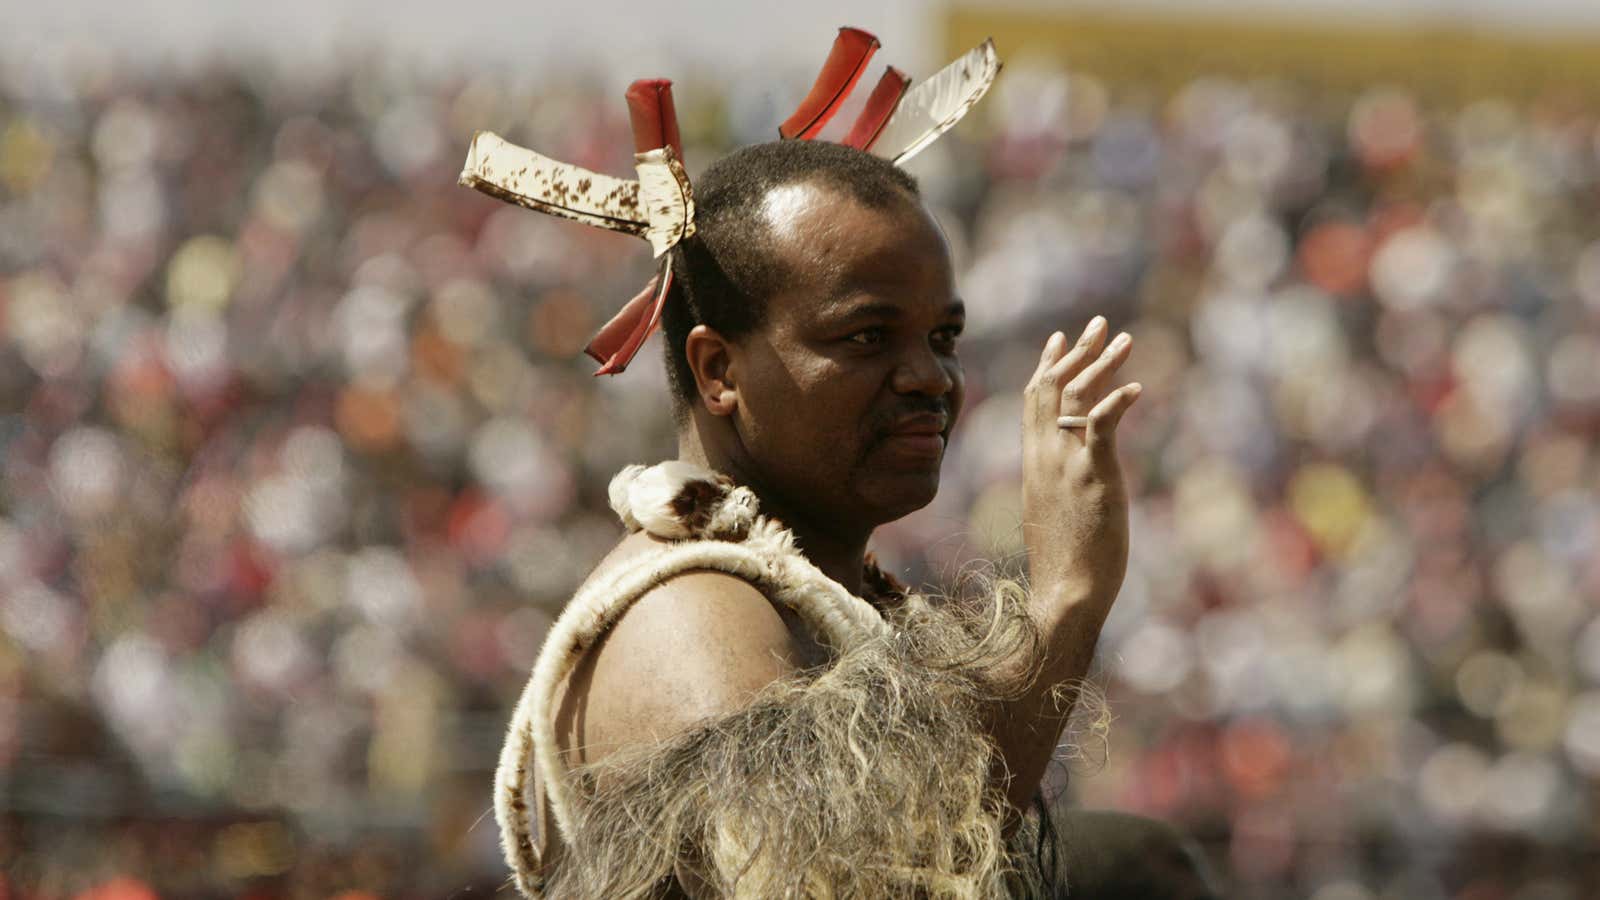 Swaziland’s King Mswati III is one of Africa’s few remaining national monarchs.